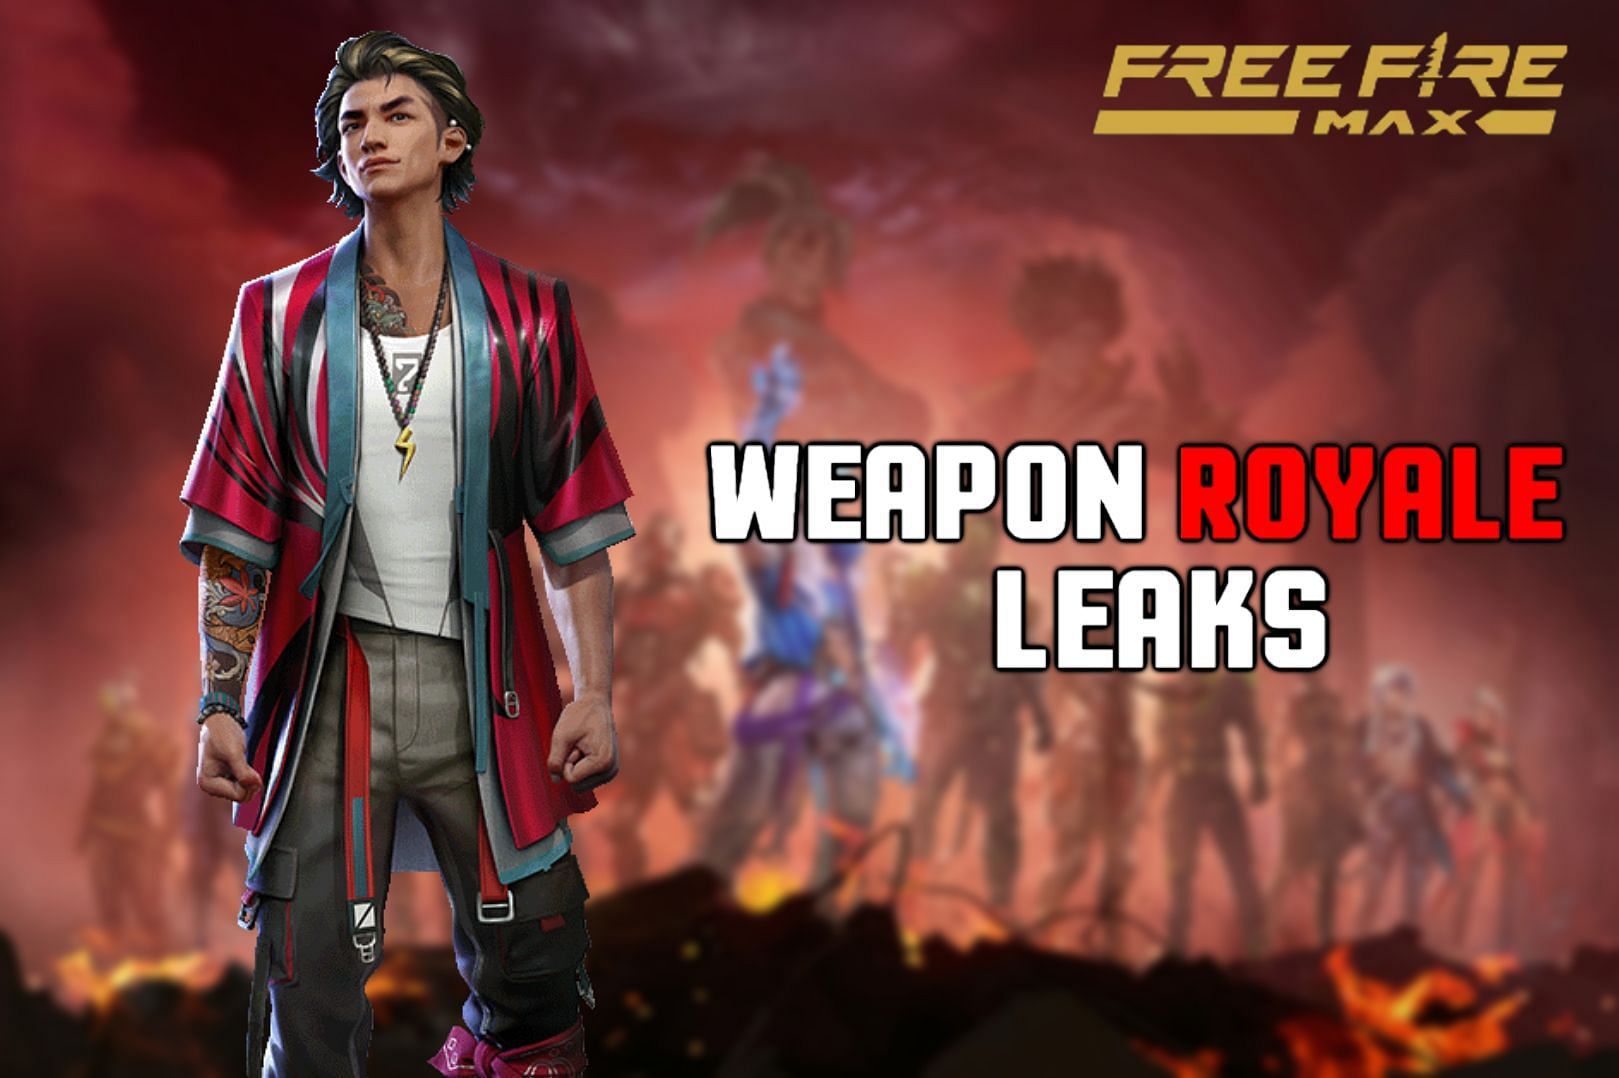 The next Free Fire MAX Weapon Royale has been leaked (Image via Sportskeeda)